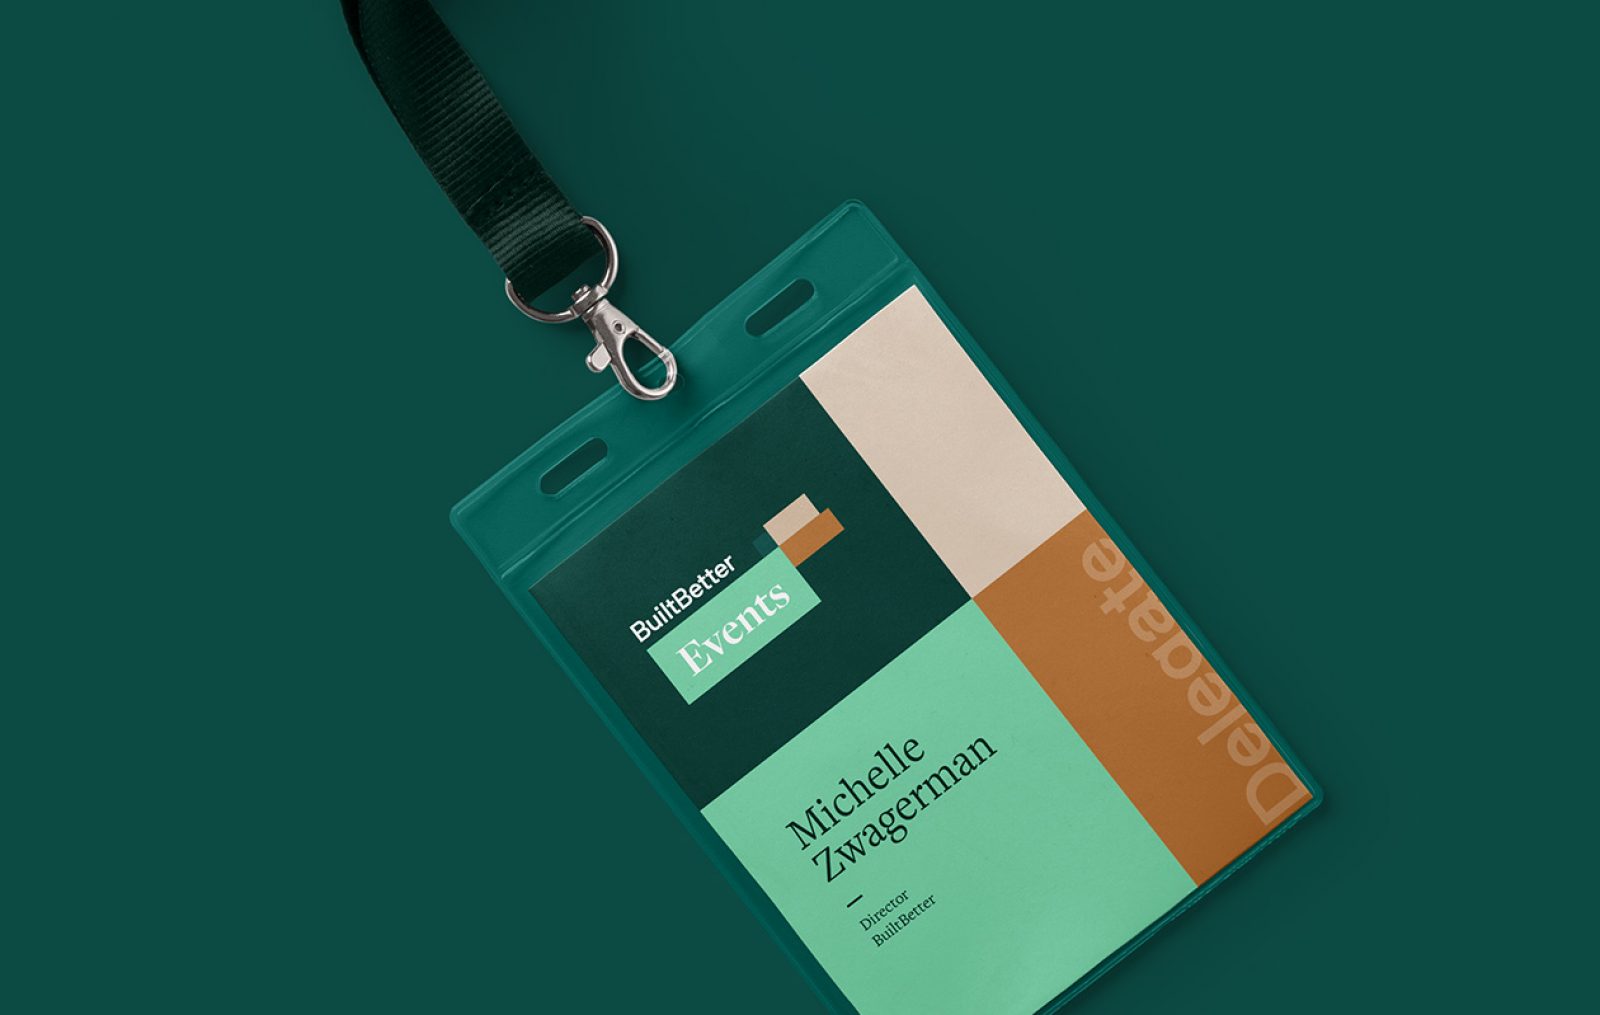 A conference name tag on a lanyard with the attendee name printed on it.